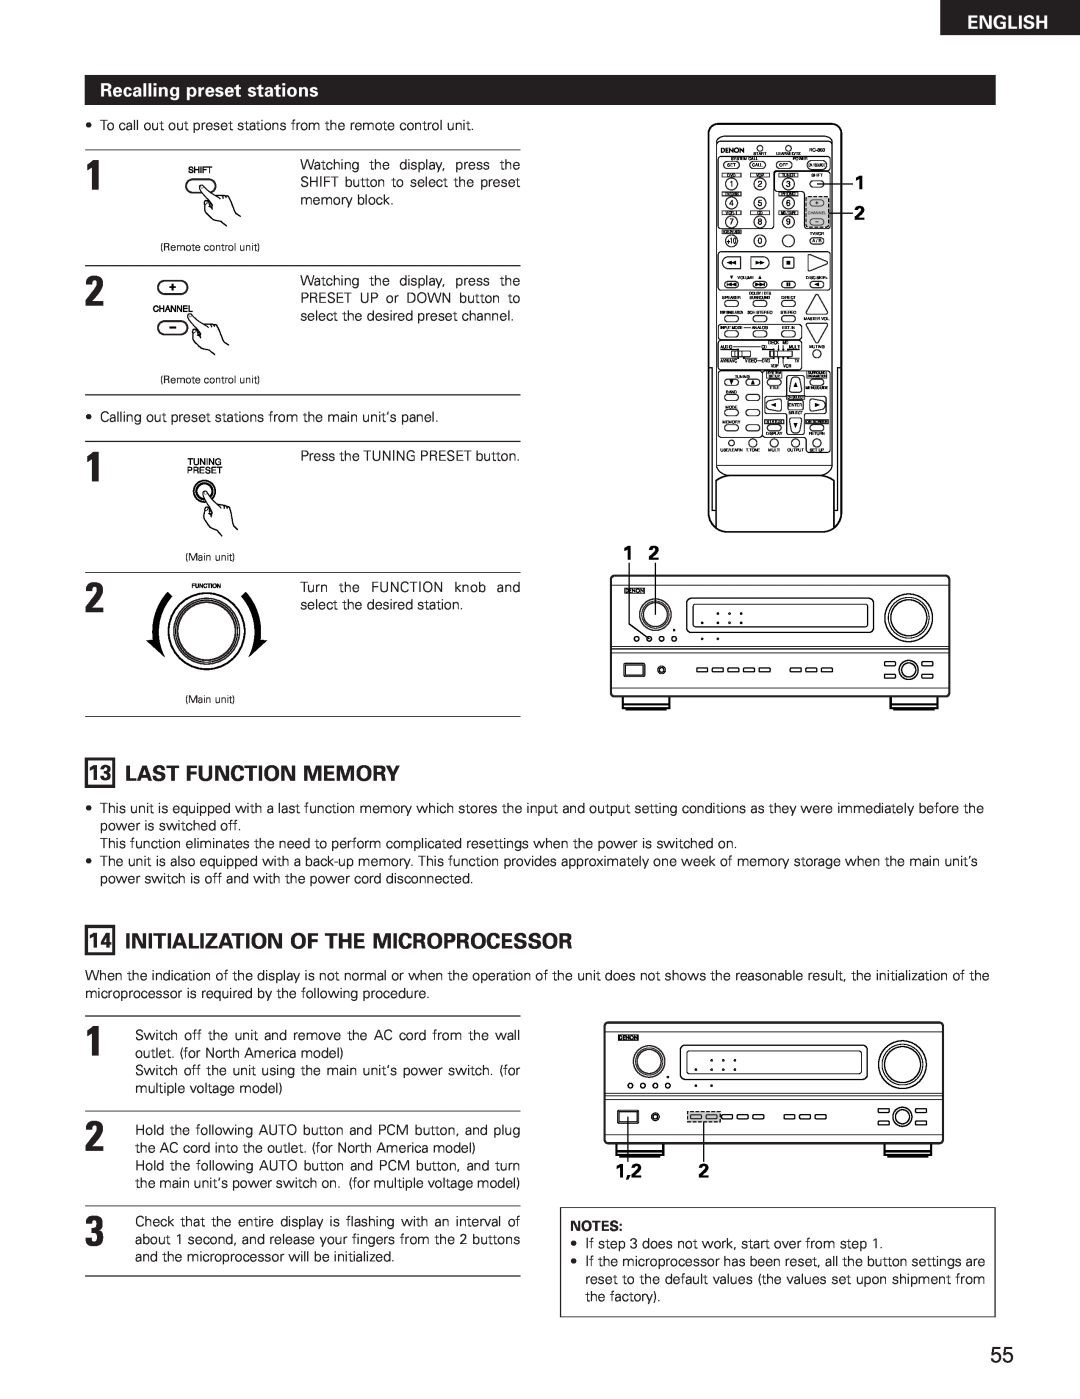 Denon AVR-3300 manual 13LAST FUNCTION MEMORY, 14INITIALIZATION OF THE MICROPROCESSOR, ENGLISH Recalling preset stations 